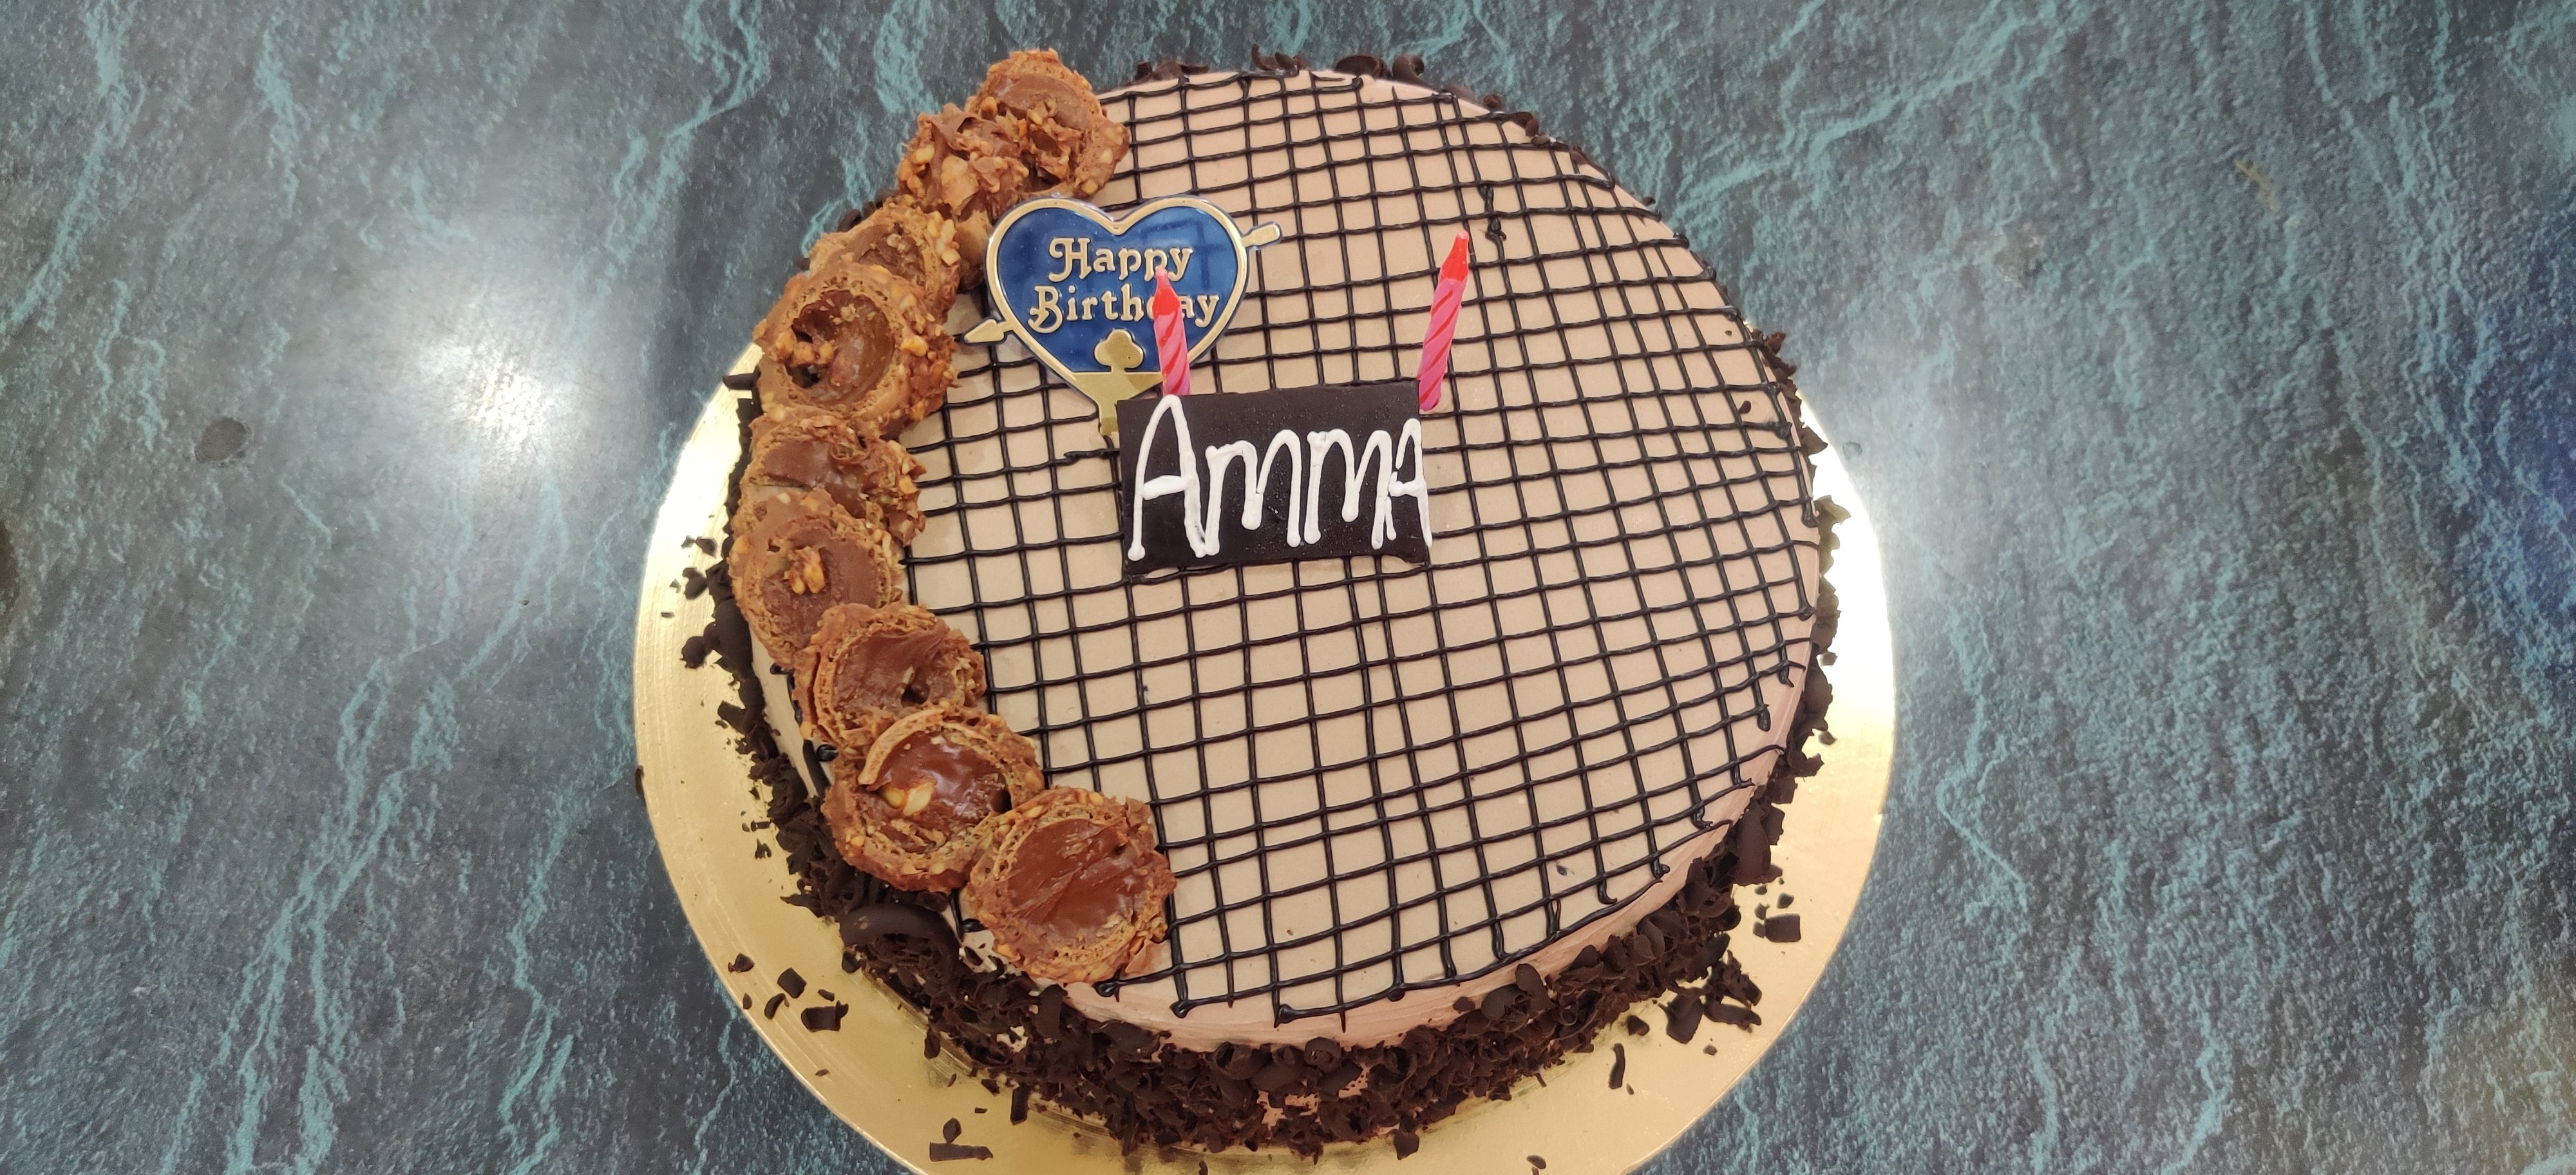 Amma's Pastries UAE - #WishfulWednesday All you need is a gooey helping of  delicious red velvet cake as the week winds down. Get a taste of that  velvety goodness at an Amma's